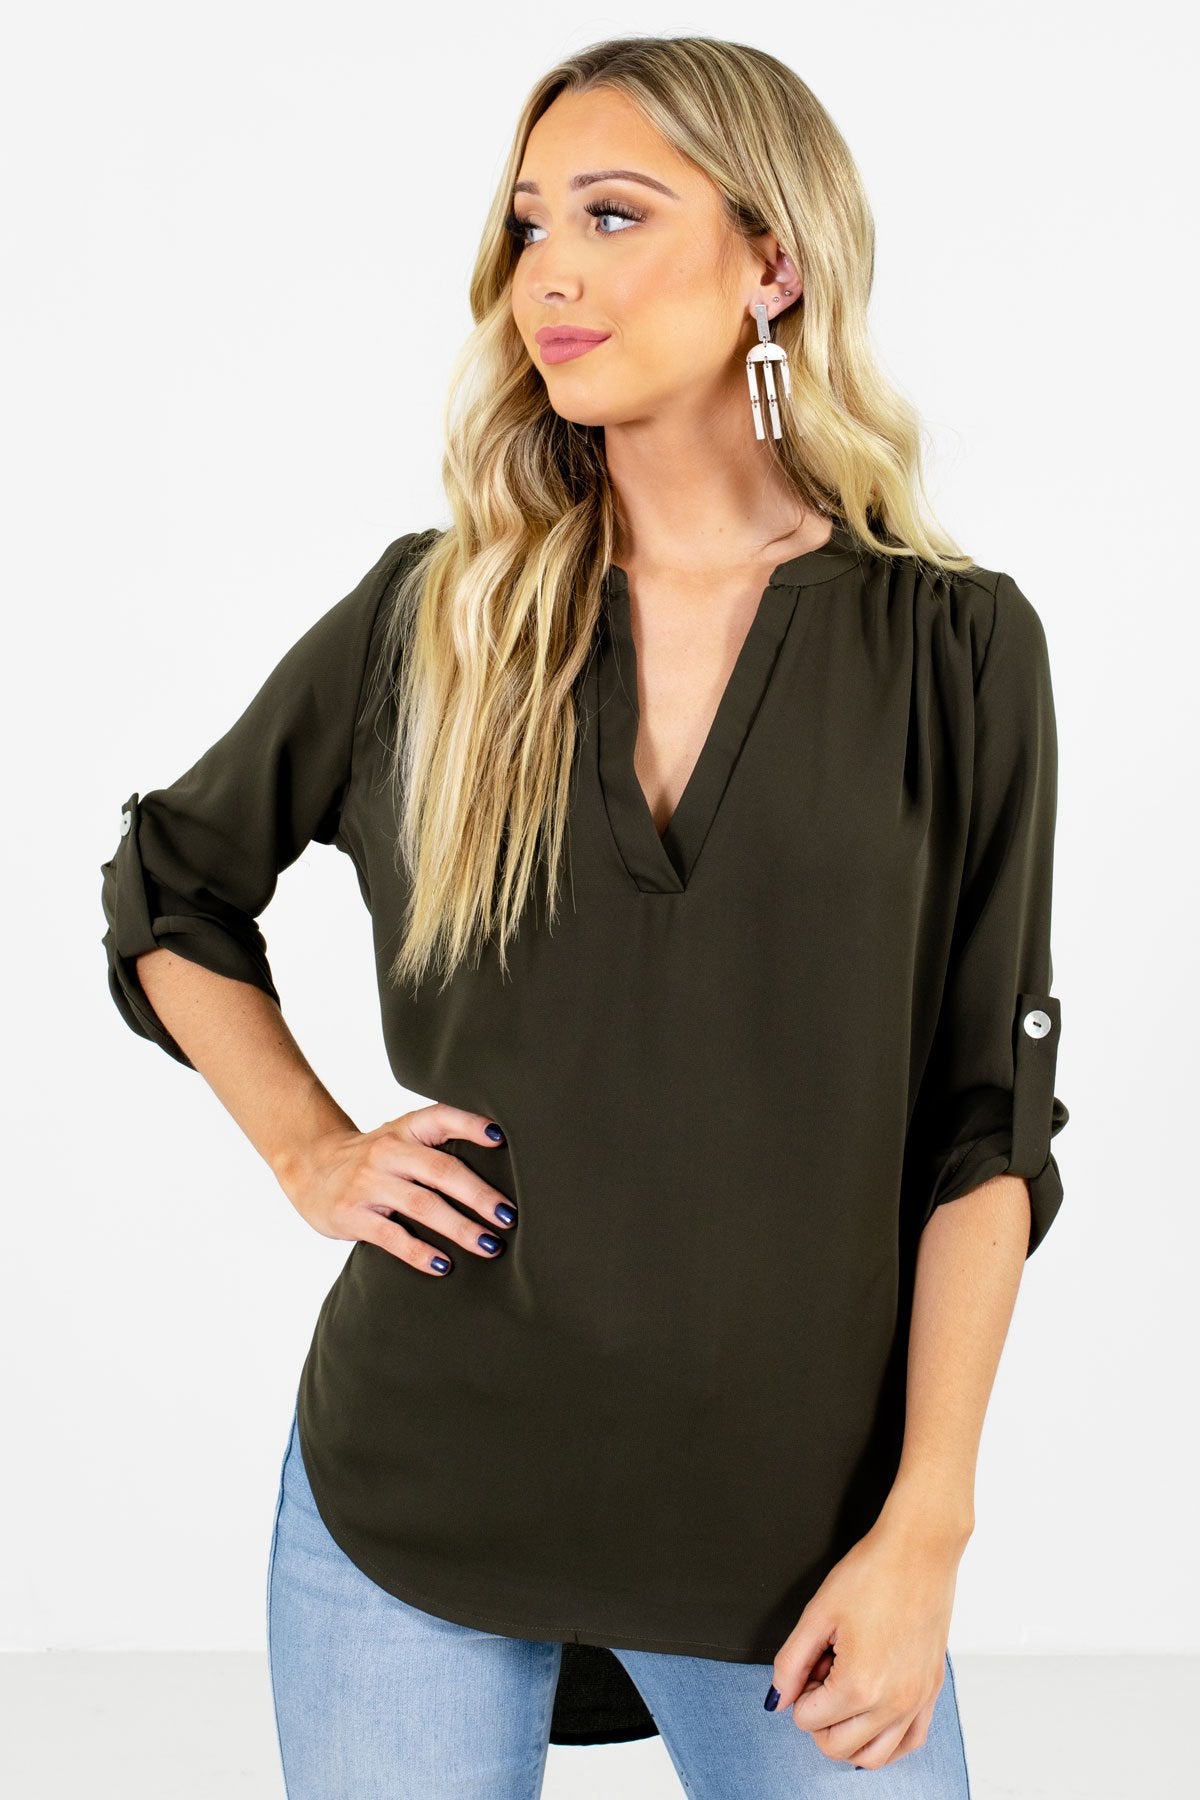 Women’s Olive Green Lightweight Boutique Blouses for Women